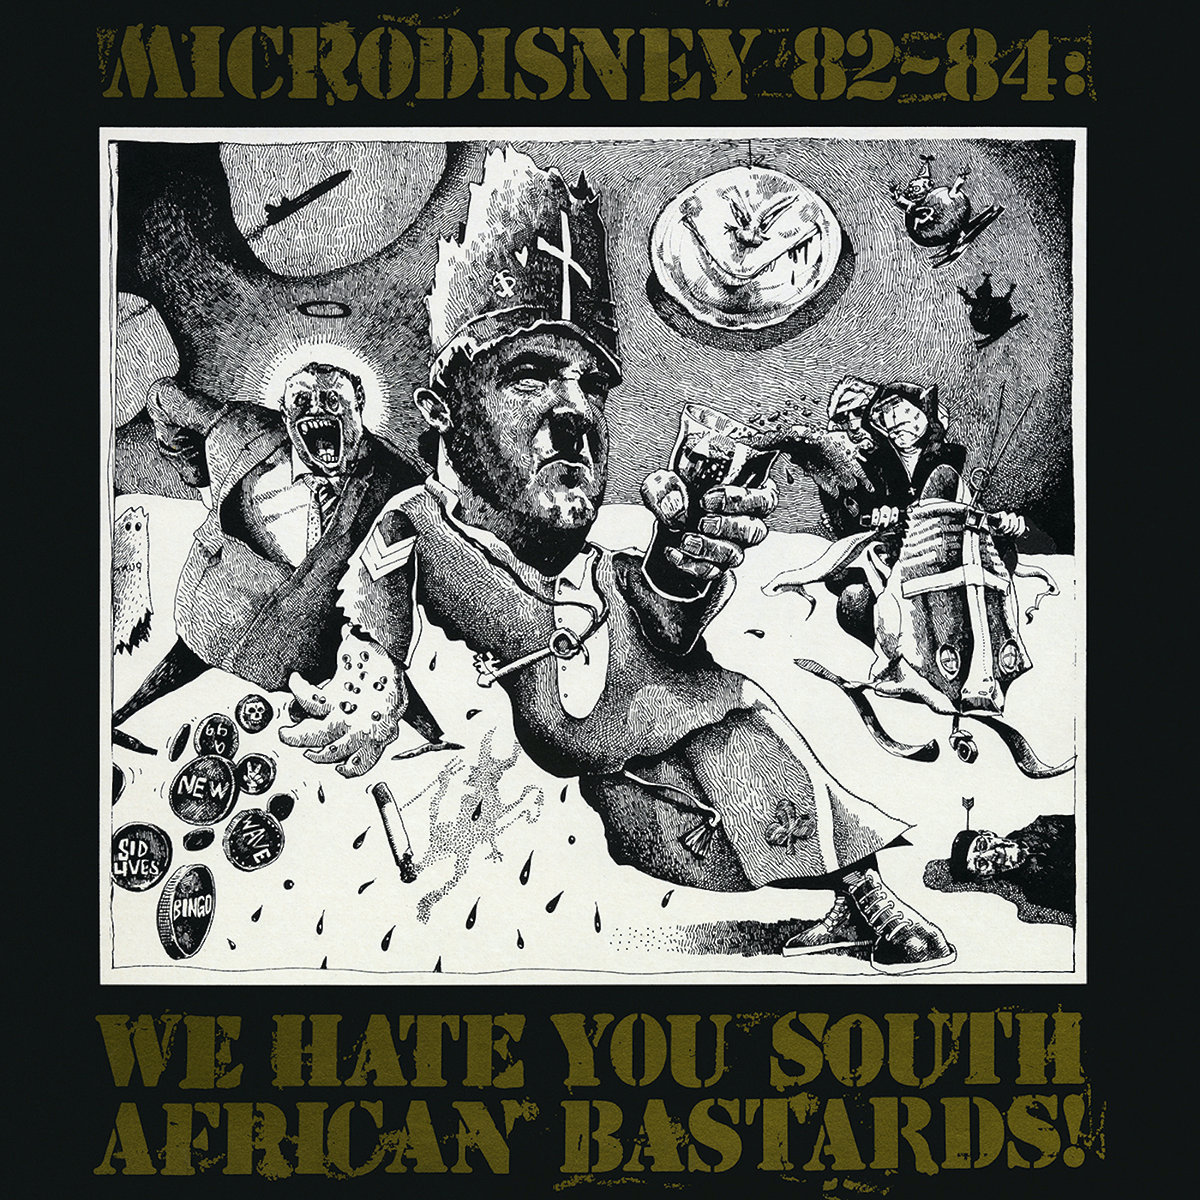 Microdisney - We Hate You South African Bastards is re-released today on limited edition clear vinyl LP by @DimpleDiscs . Available from all good record stores. #Microdisney